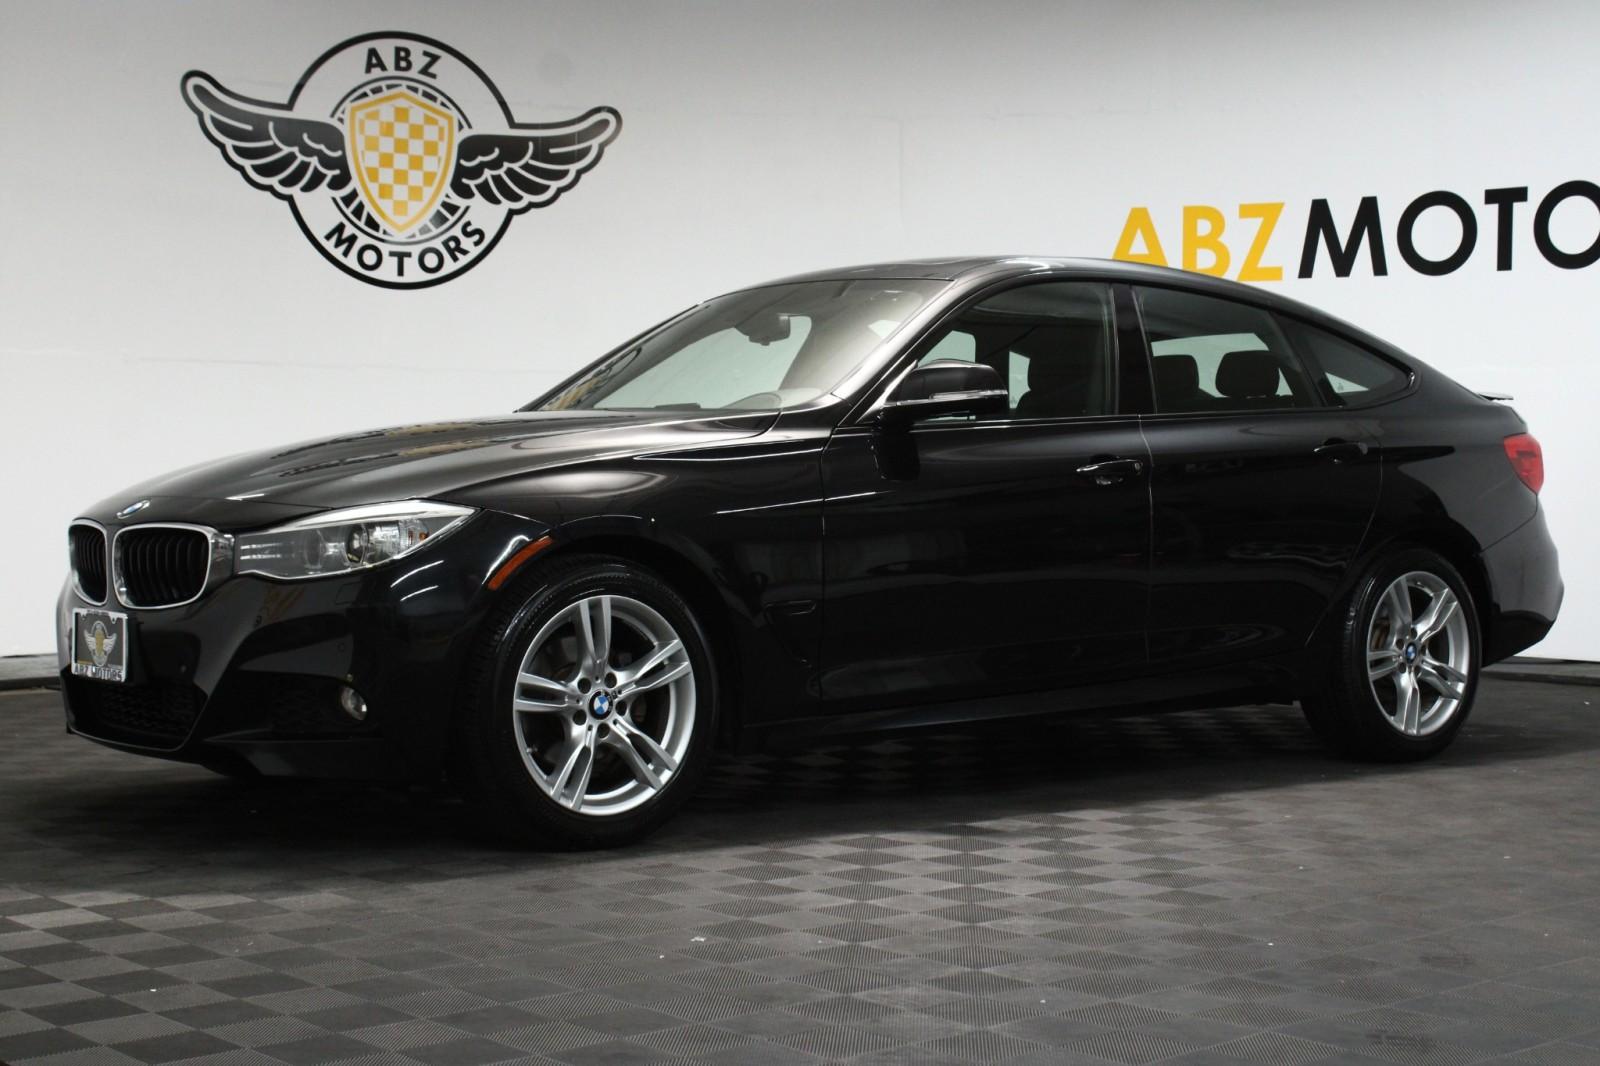 Pre-Owned 2015 BMW 3 Series Gran Turismo 328i xDrive 4dr Car in Manchester  #FD672359